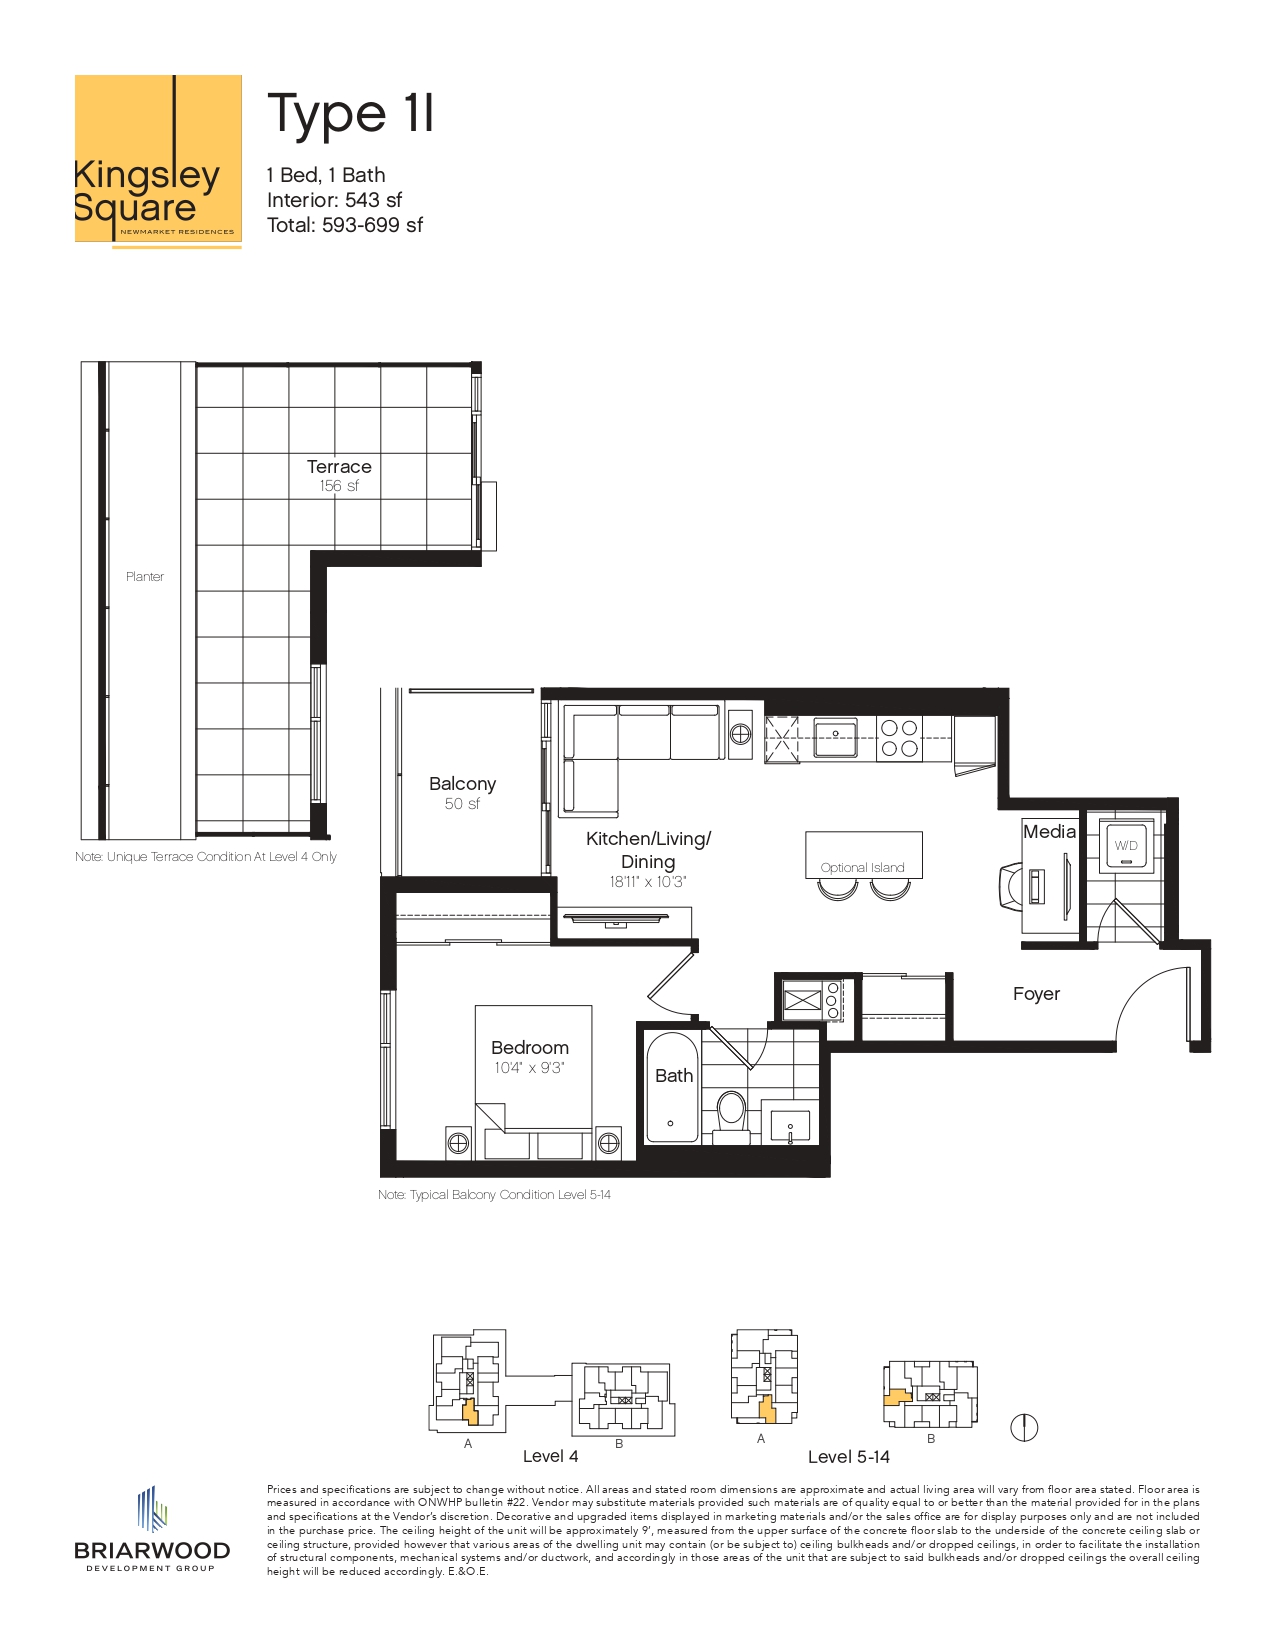 1I Floor Plan of Kingsley Square Condos with undefined beds